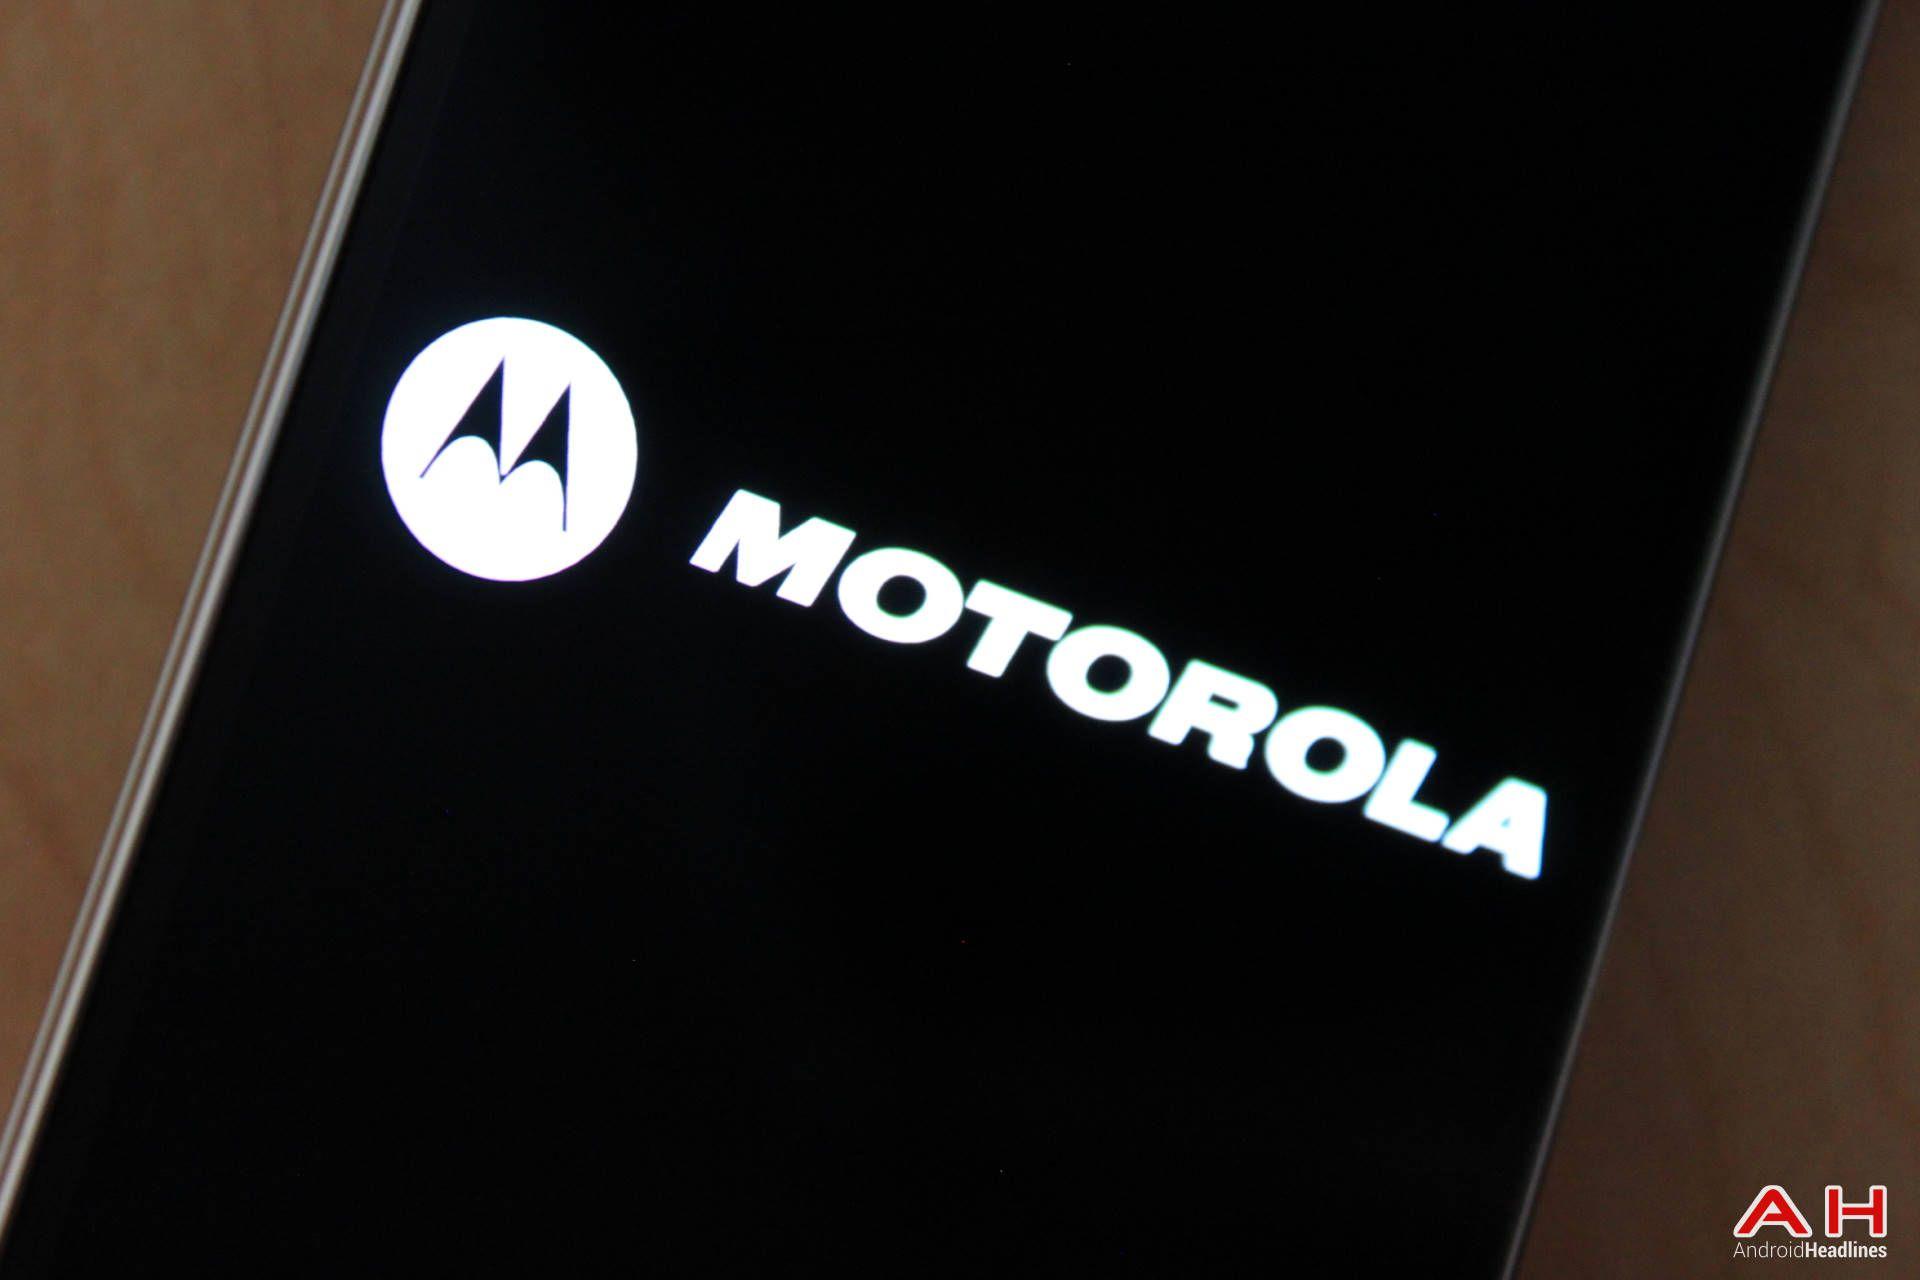 First Motorola Logo - Do You Remember Your First Motorola? A Brief History of Moto ...